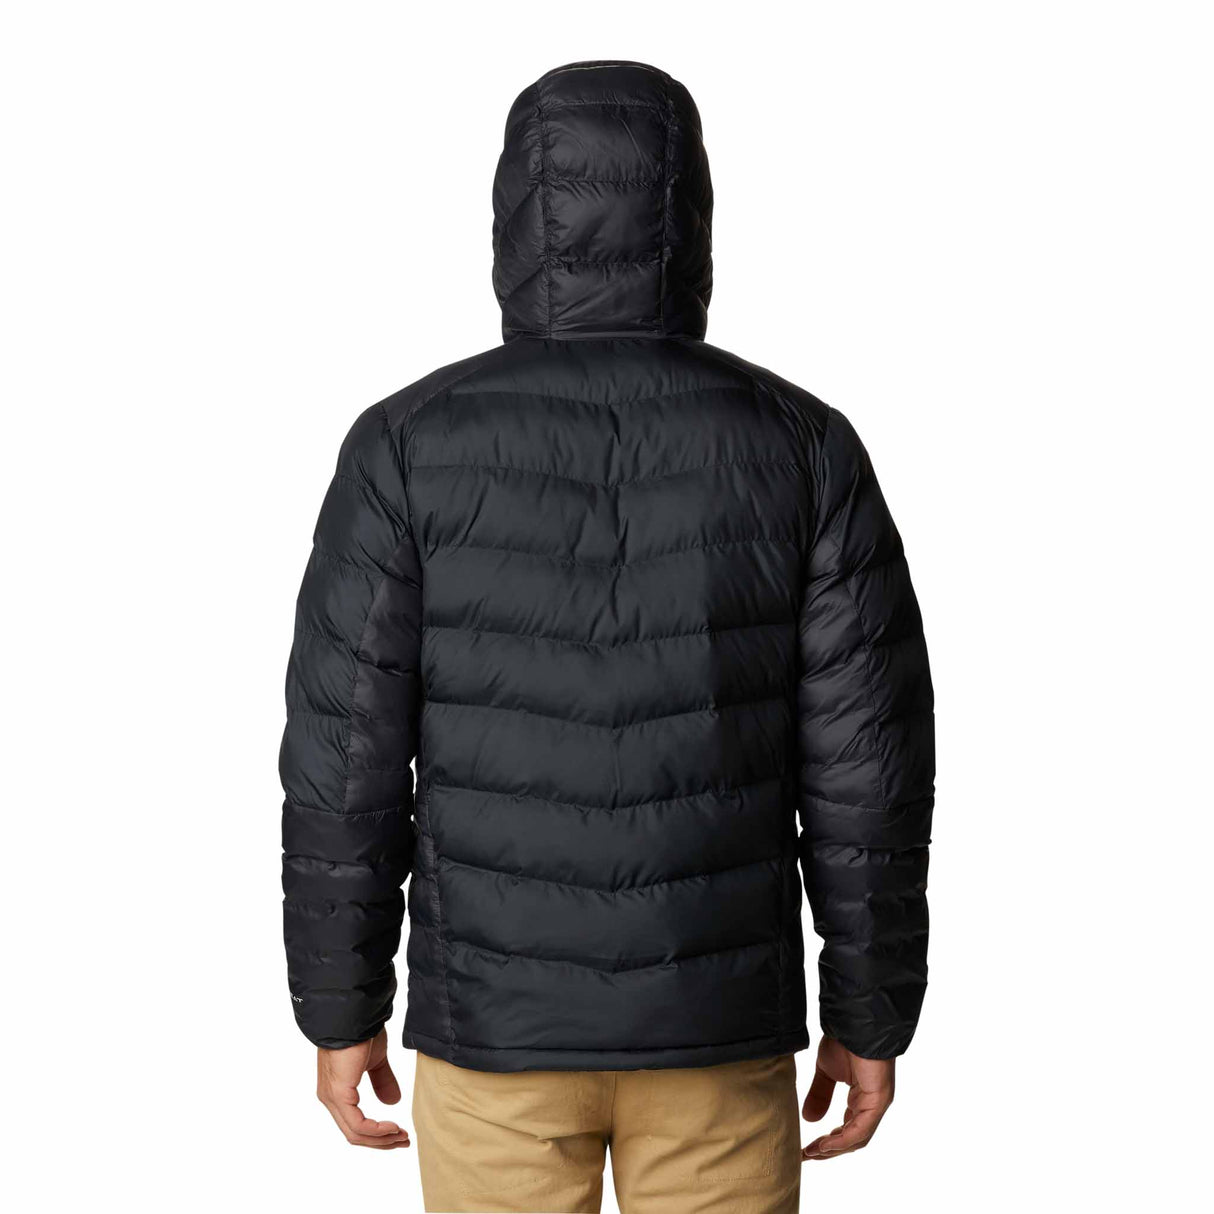 Columbia Labyrinth Loop™ Omni-Heat™ Infinity manteau isolé pour homme - Black